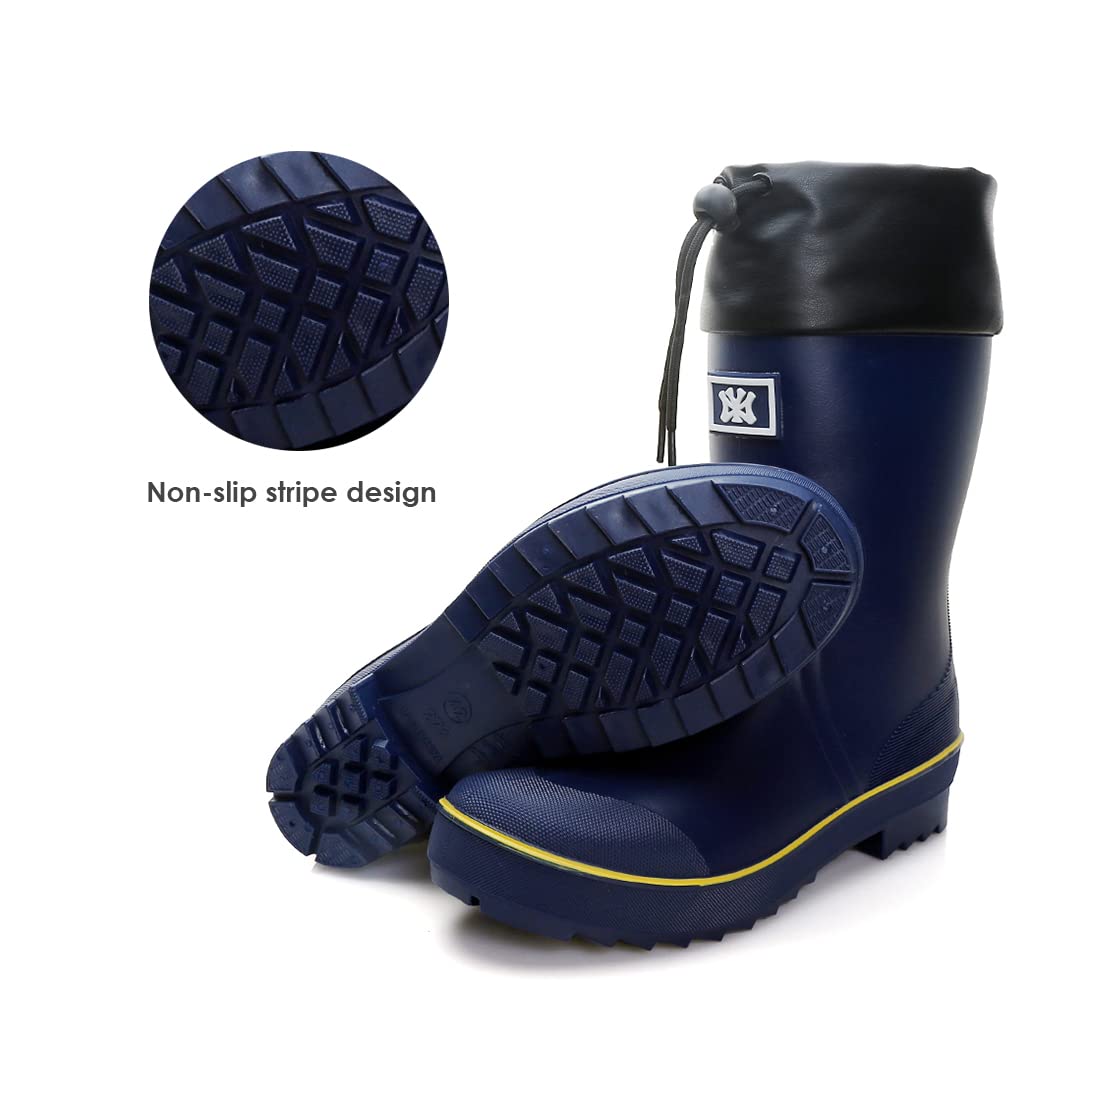 Rain Boots for Men, Waterproof PVC Rubber Boots Mens Garden Boots, Comfort Mid-Calf Lightweight Adjustable Raining Shoes, Elastic Chelsea Ankle Rain Boots Fishing Shoes for Yard Farm Outdoor Work